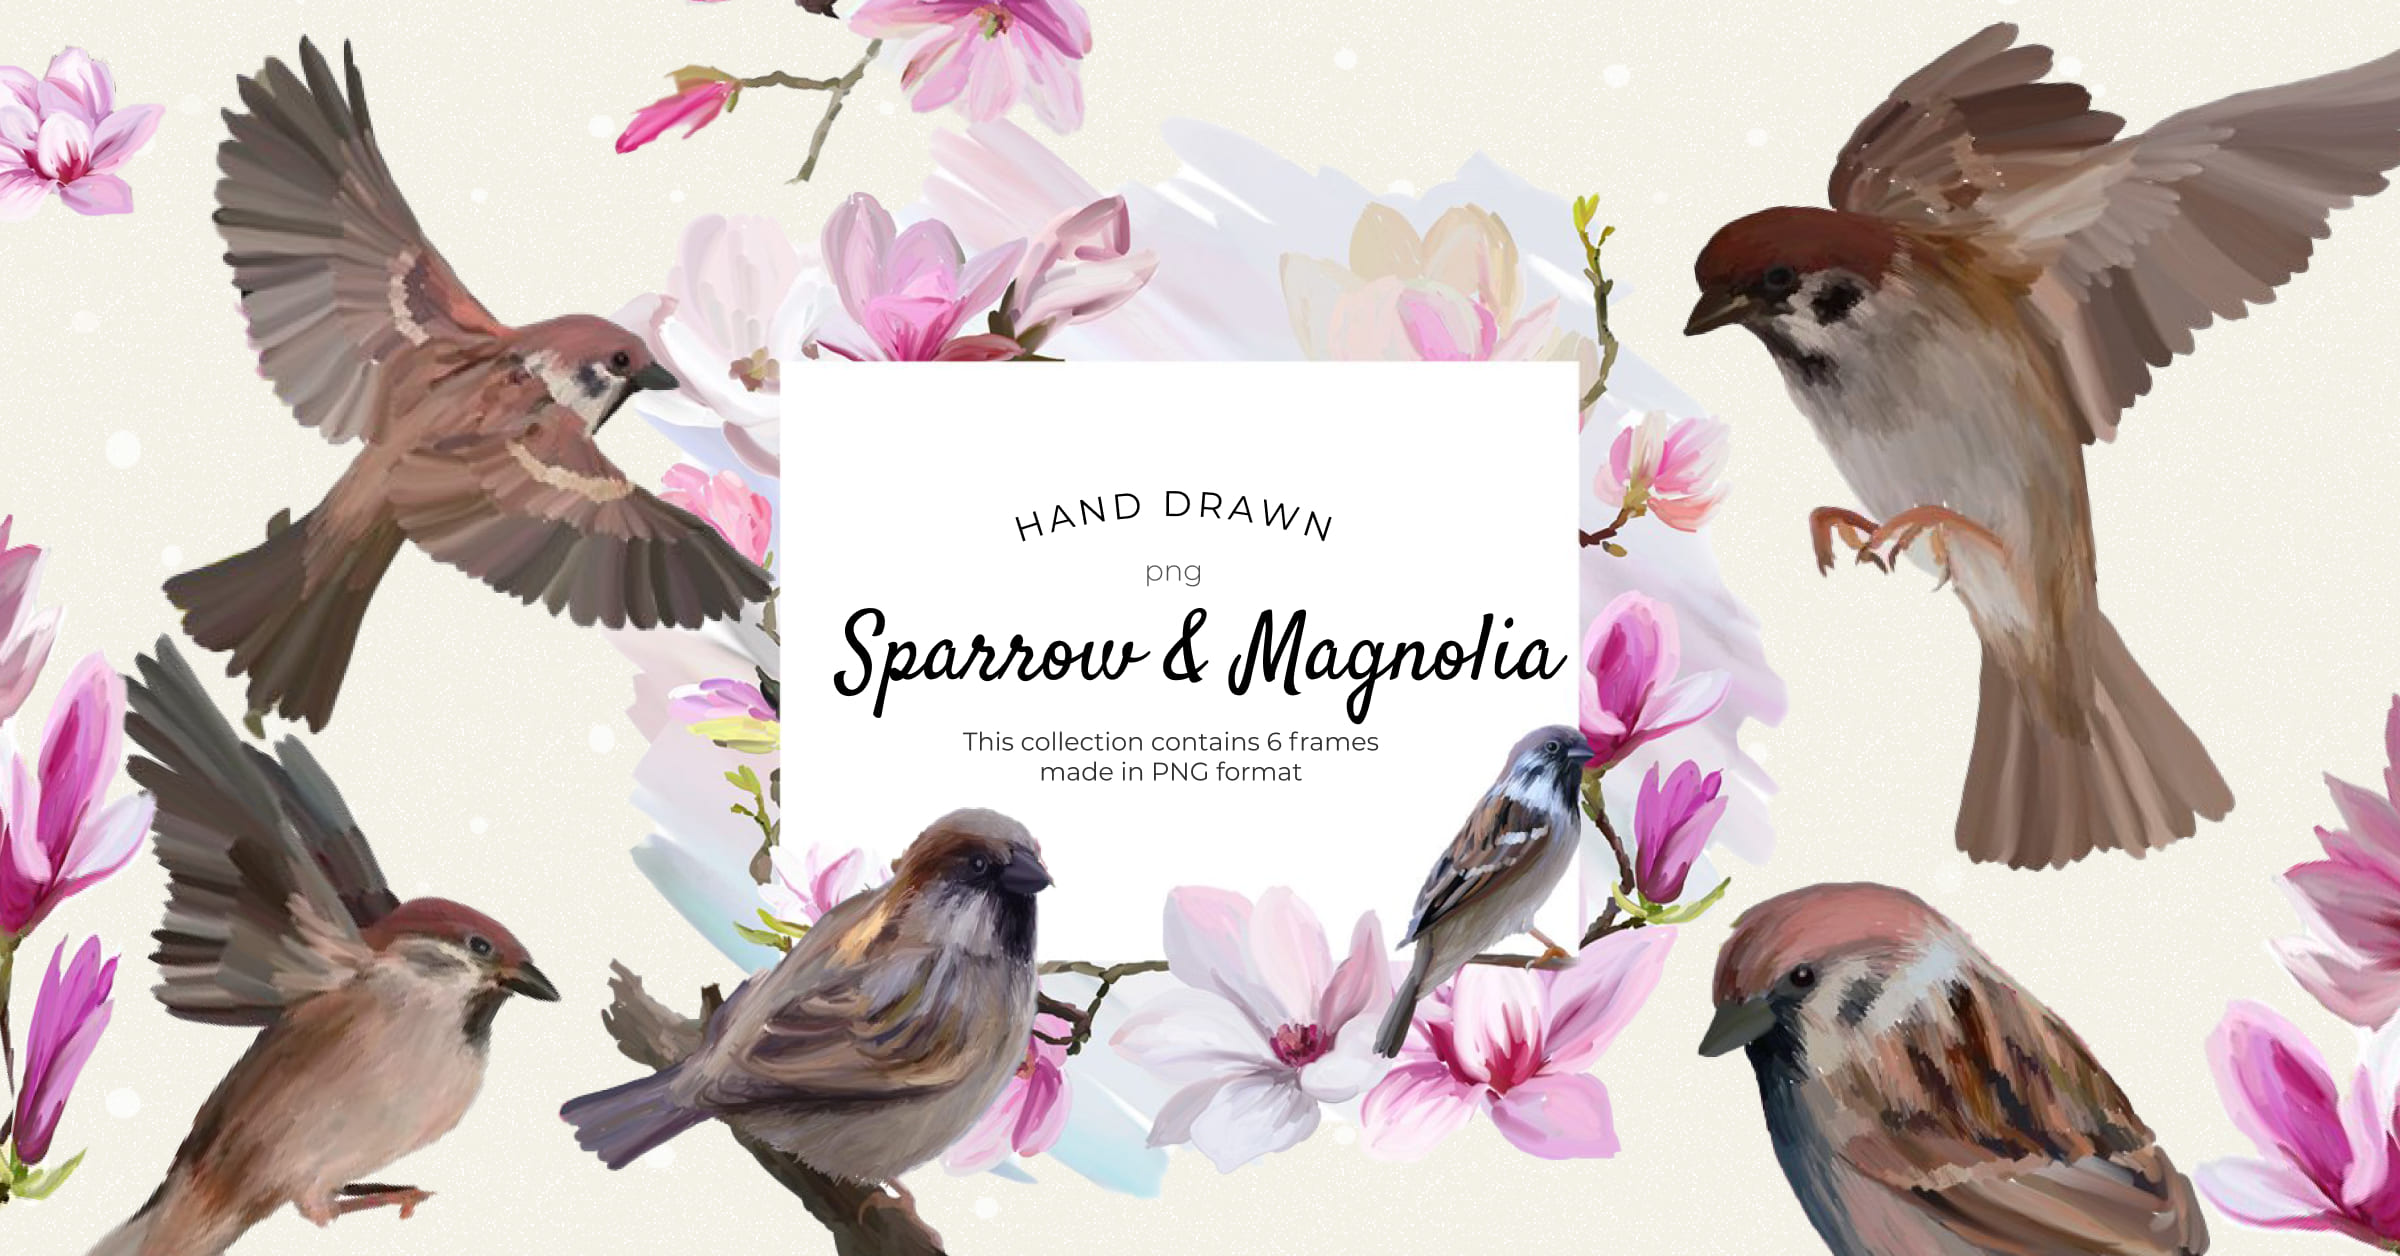 Sparrow and magnolia hand drawn floral frames - Facebook image preview.